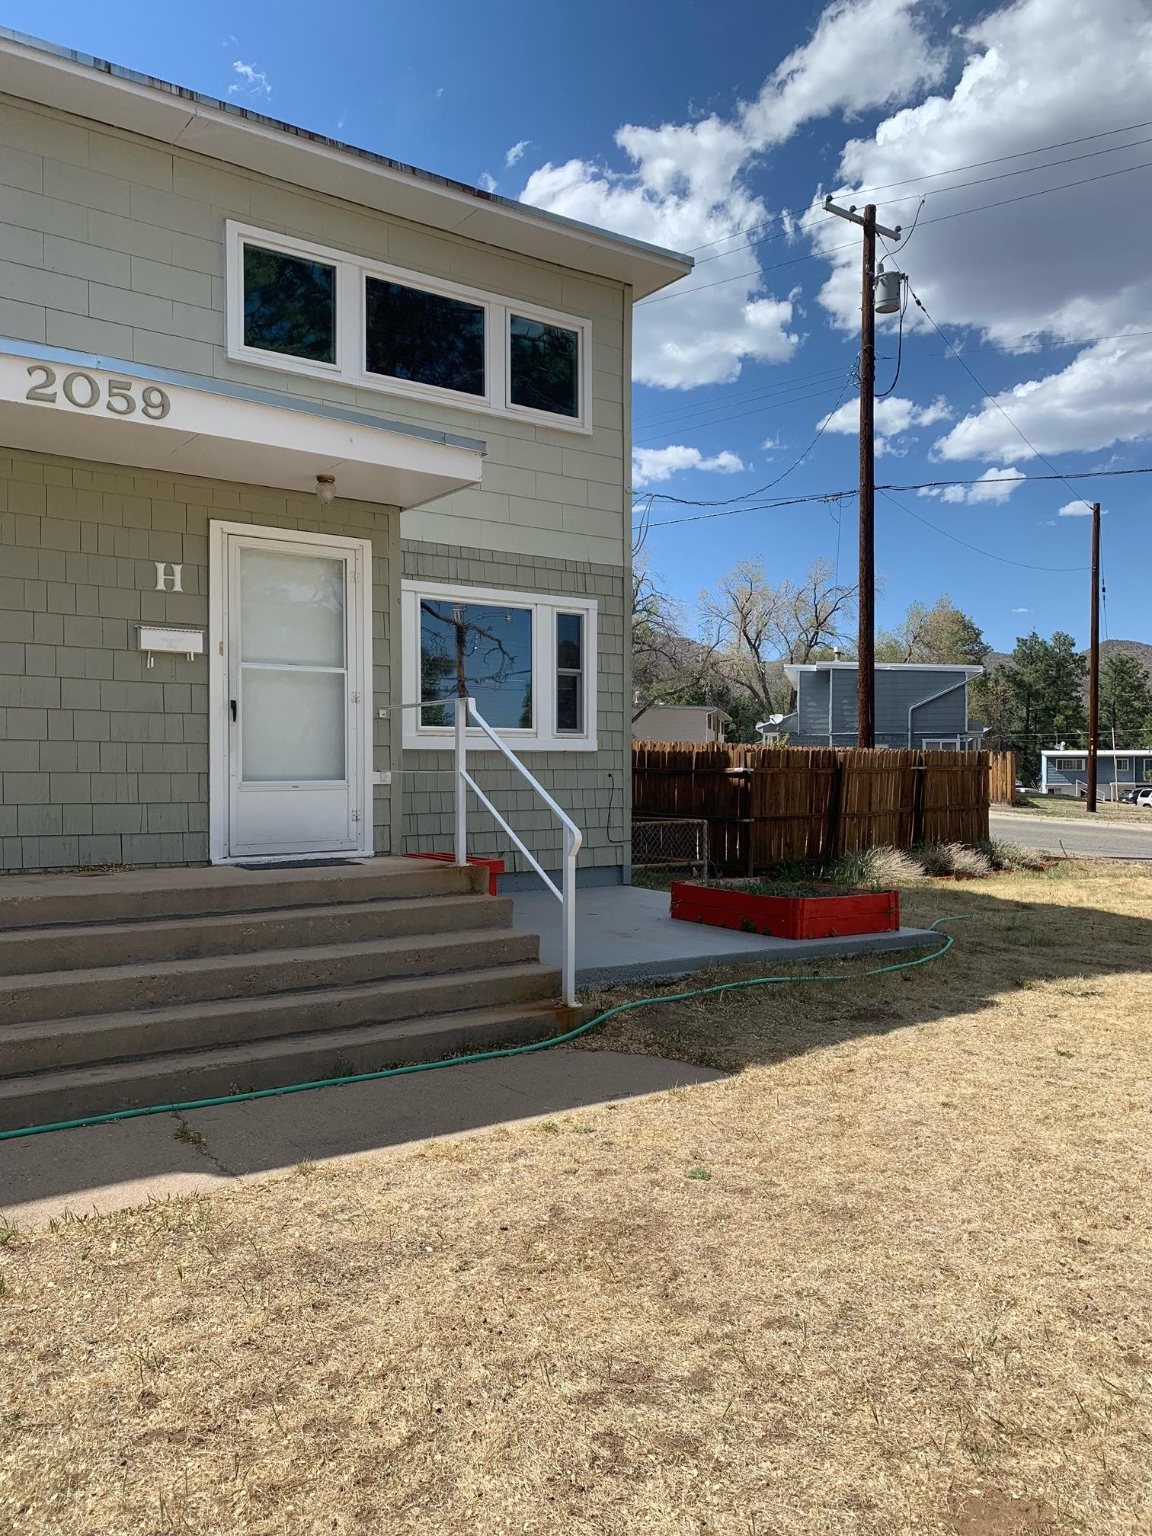 2059 41ST H, Los Alamos, New Mexico 87544, 2 Bedrooms Bedrooms, ,1 BathroomBathrooms,Residential,For Sale,2059 41ST H,202201820